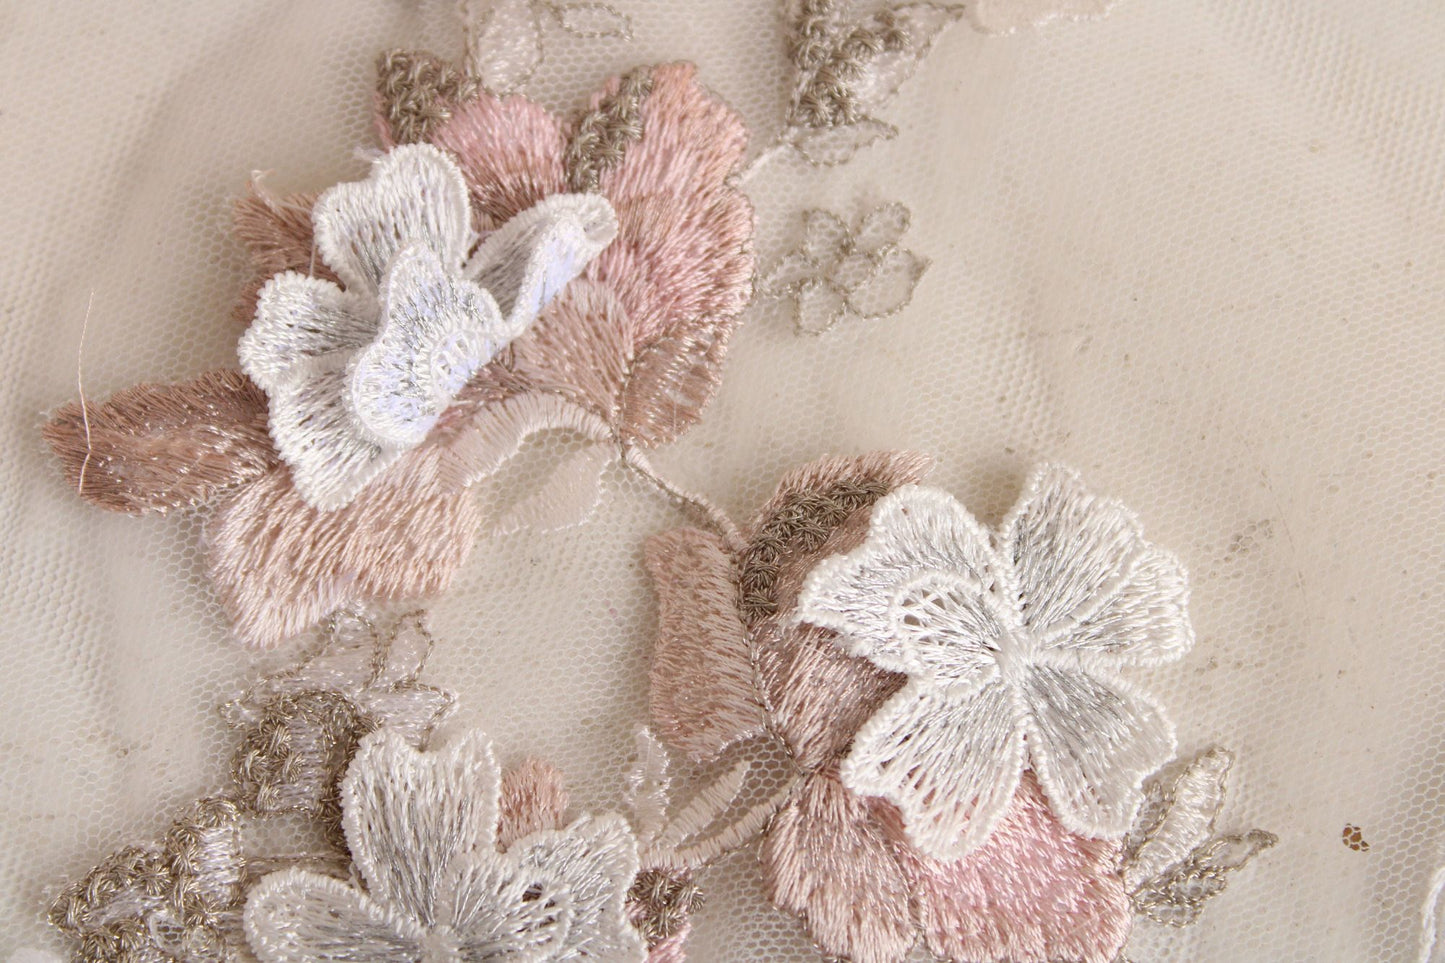 Embroidered Appliques, Embroidered Fabric Ends with Flower Appliques